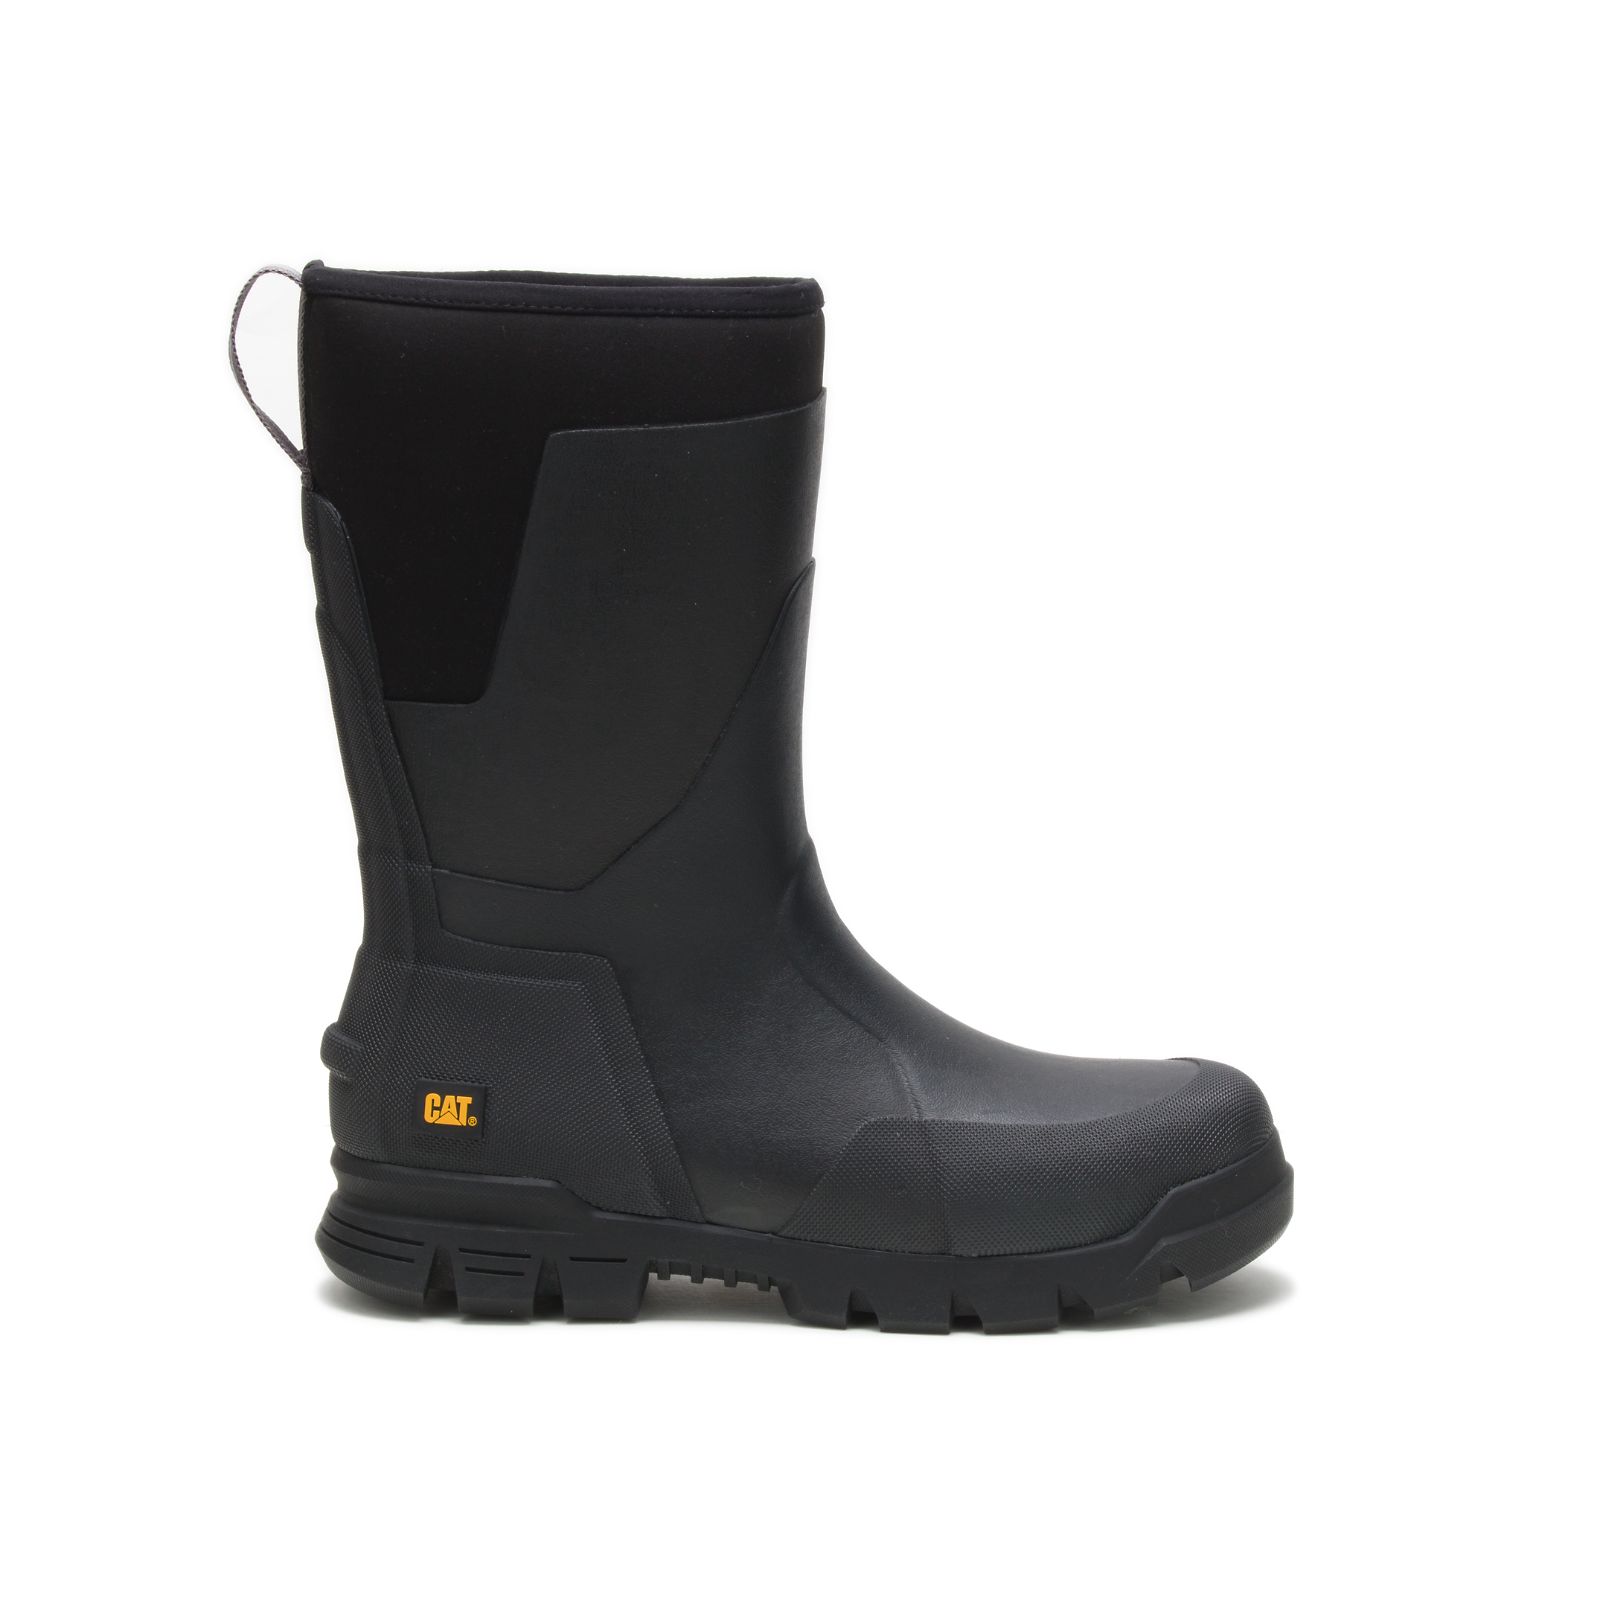 Caterpillar Stormers 11" Philippines - Womens Rubber Boots - Black 57349FHCW